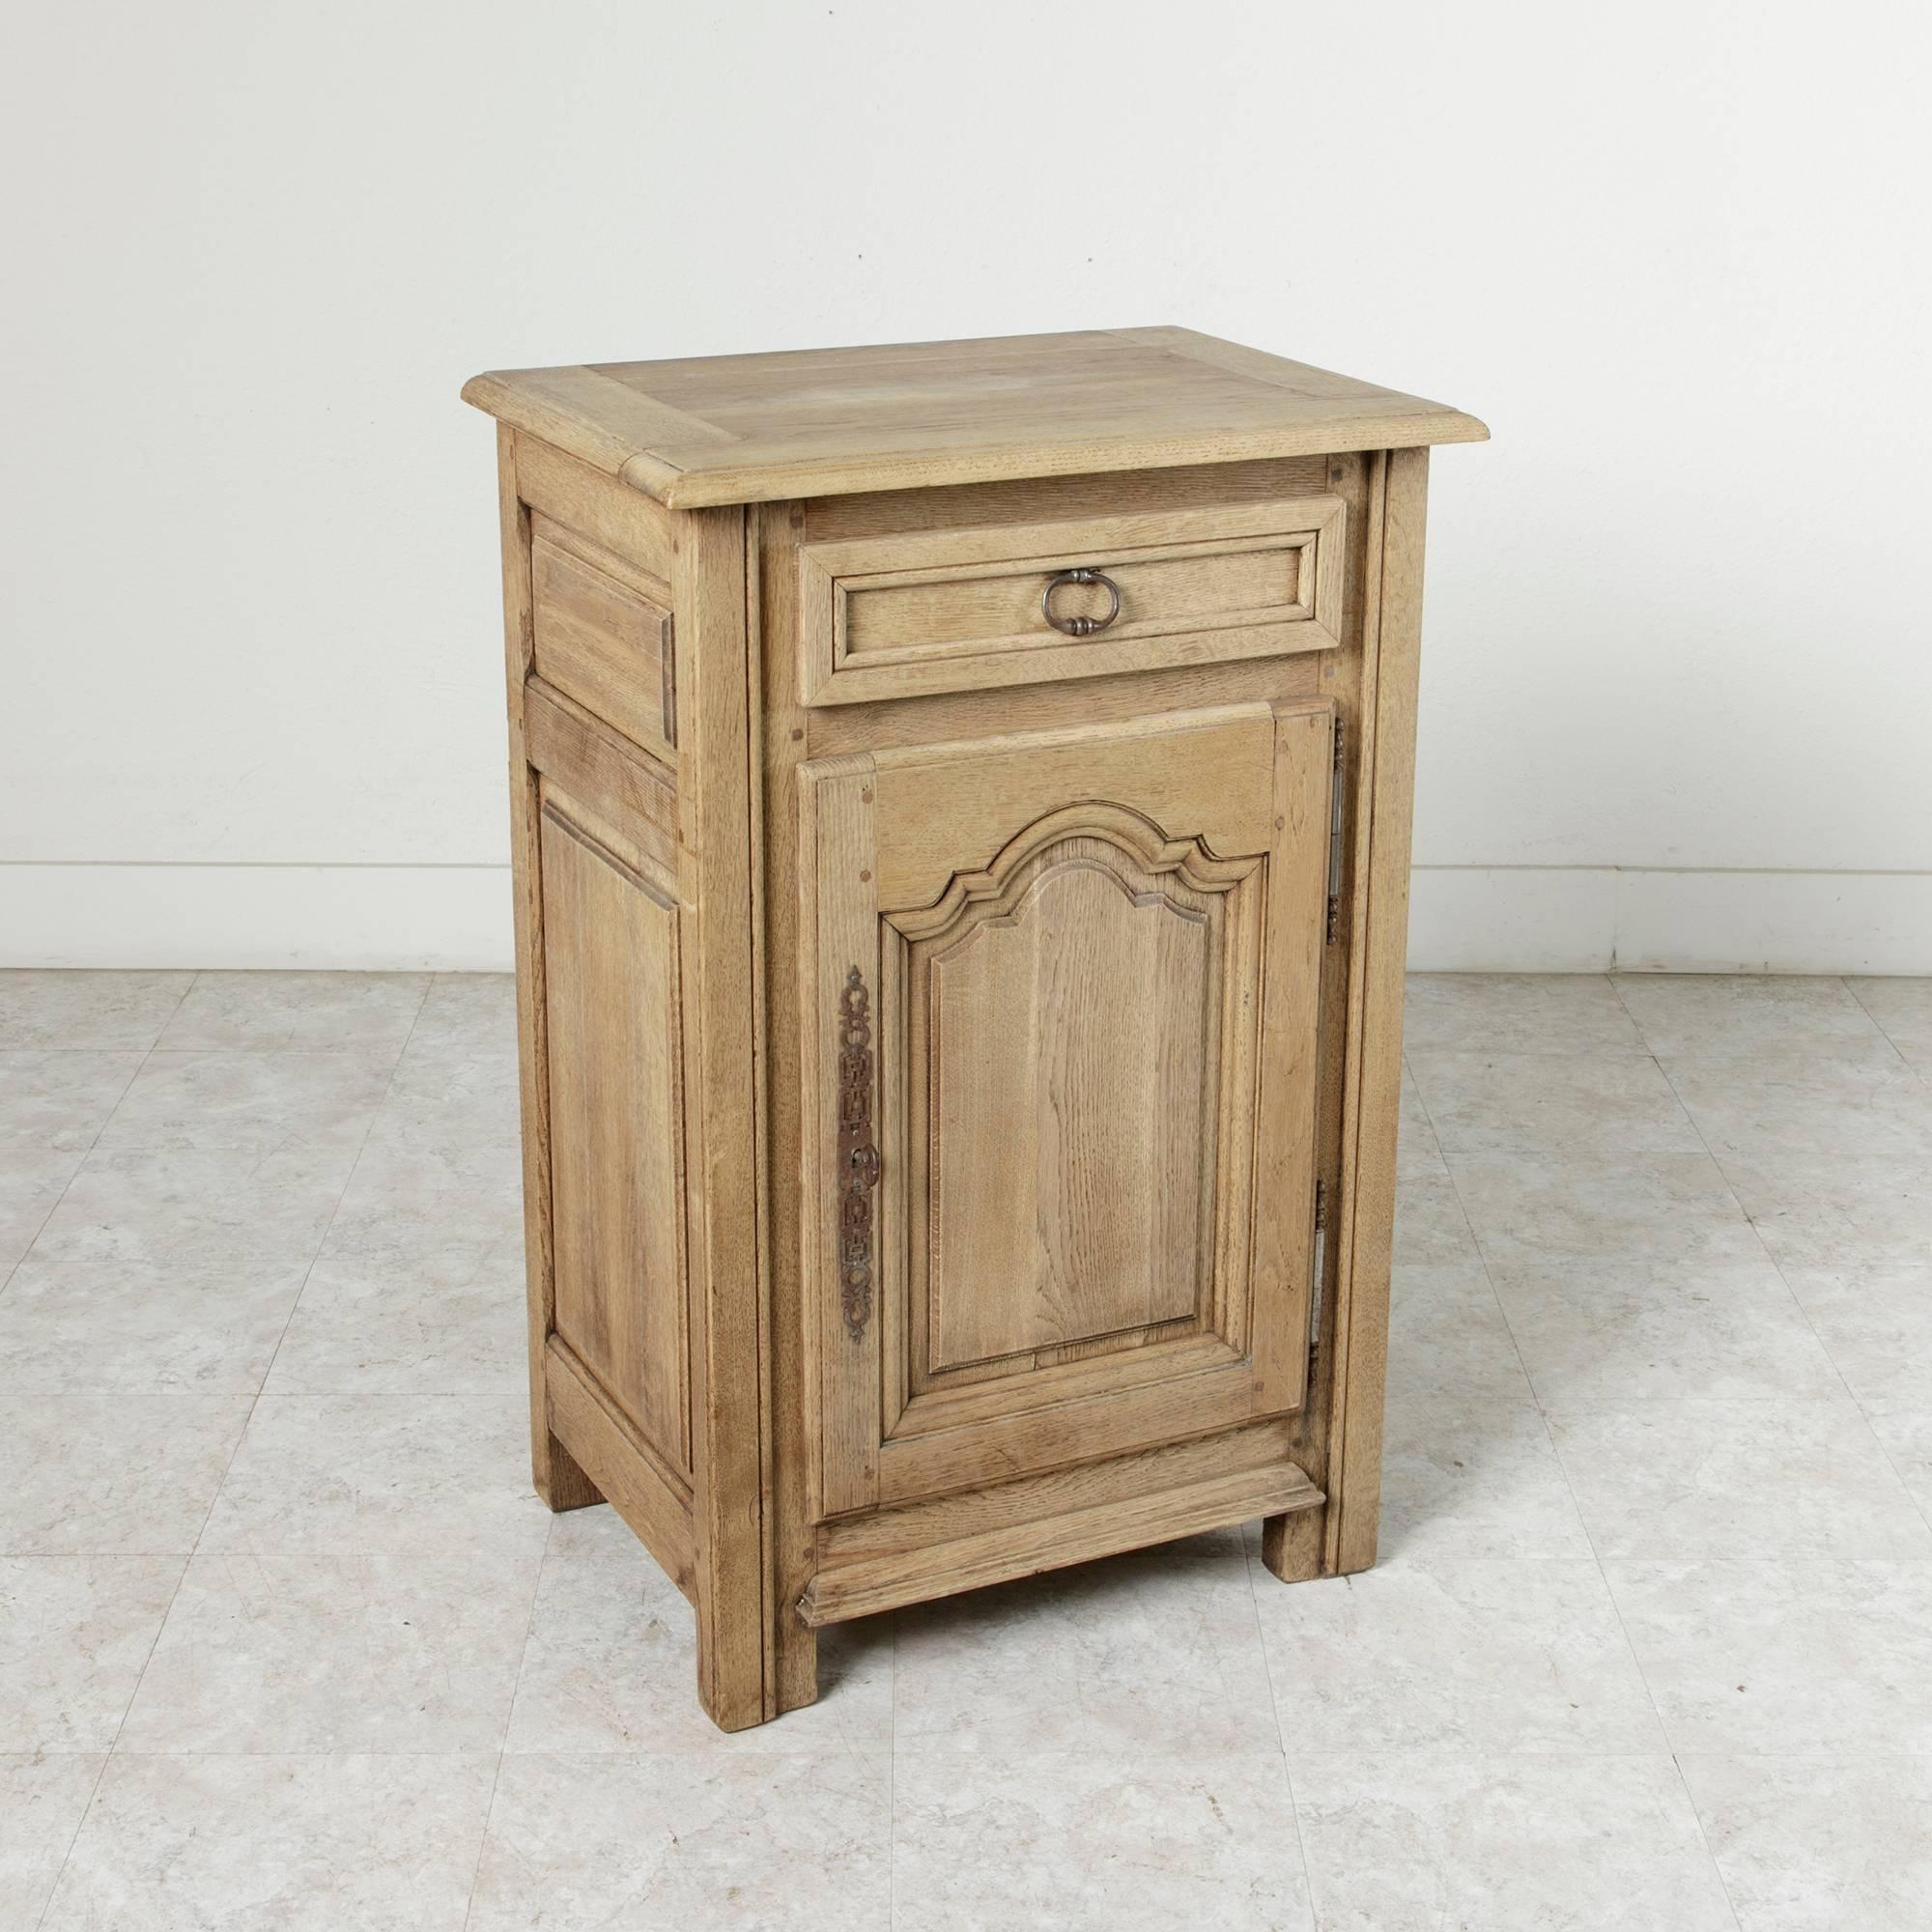 This hand-carved oak French jam cabinet bears its natural finish. Executed in the Louis XIV style with stout, straight lined legs and a symmetrically arched paneled door, its heavy style is juxtaposed by its light finish. Each side features raised